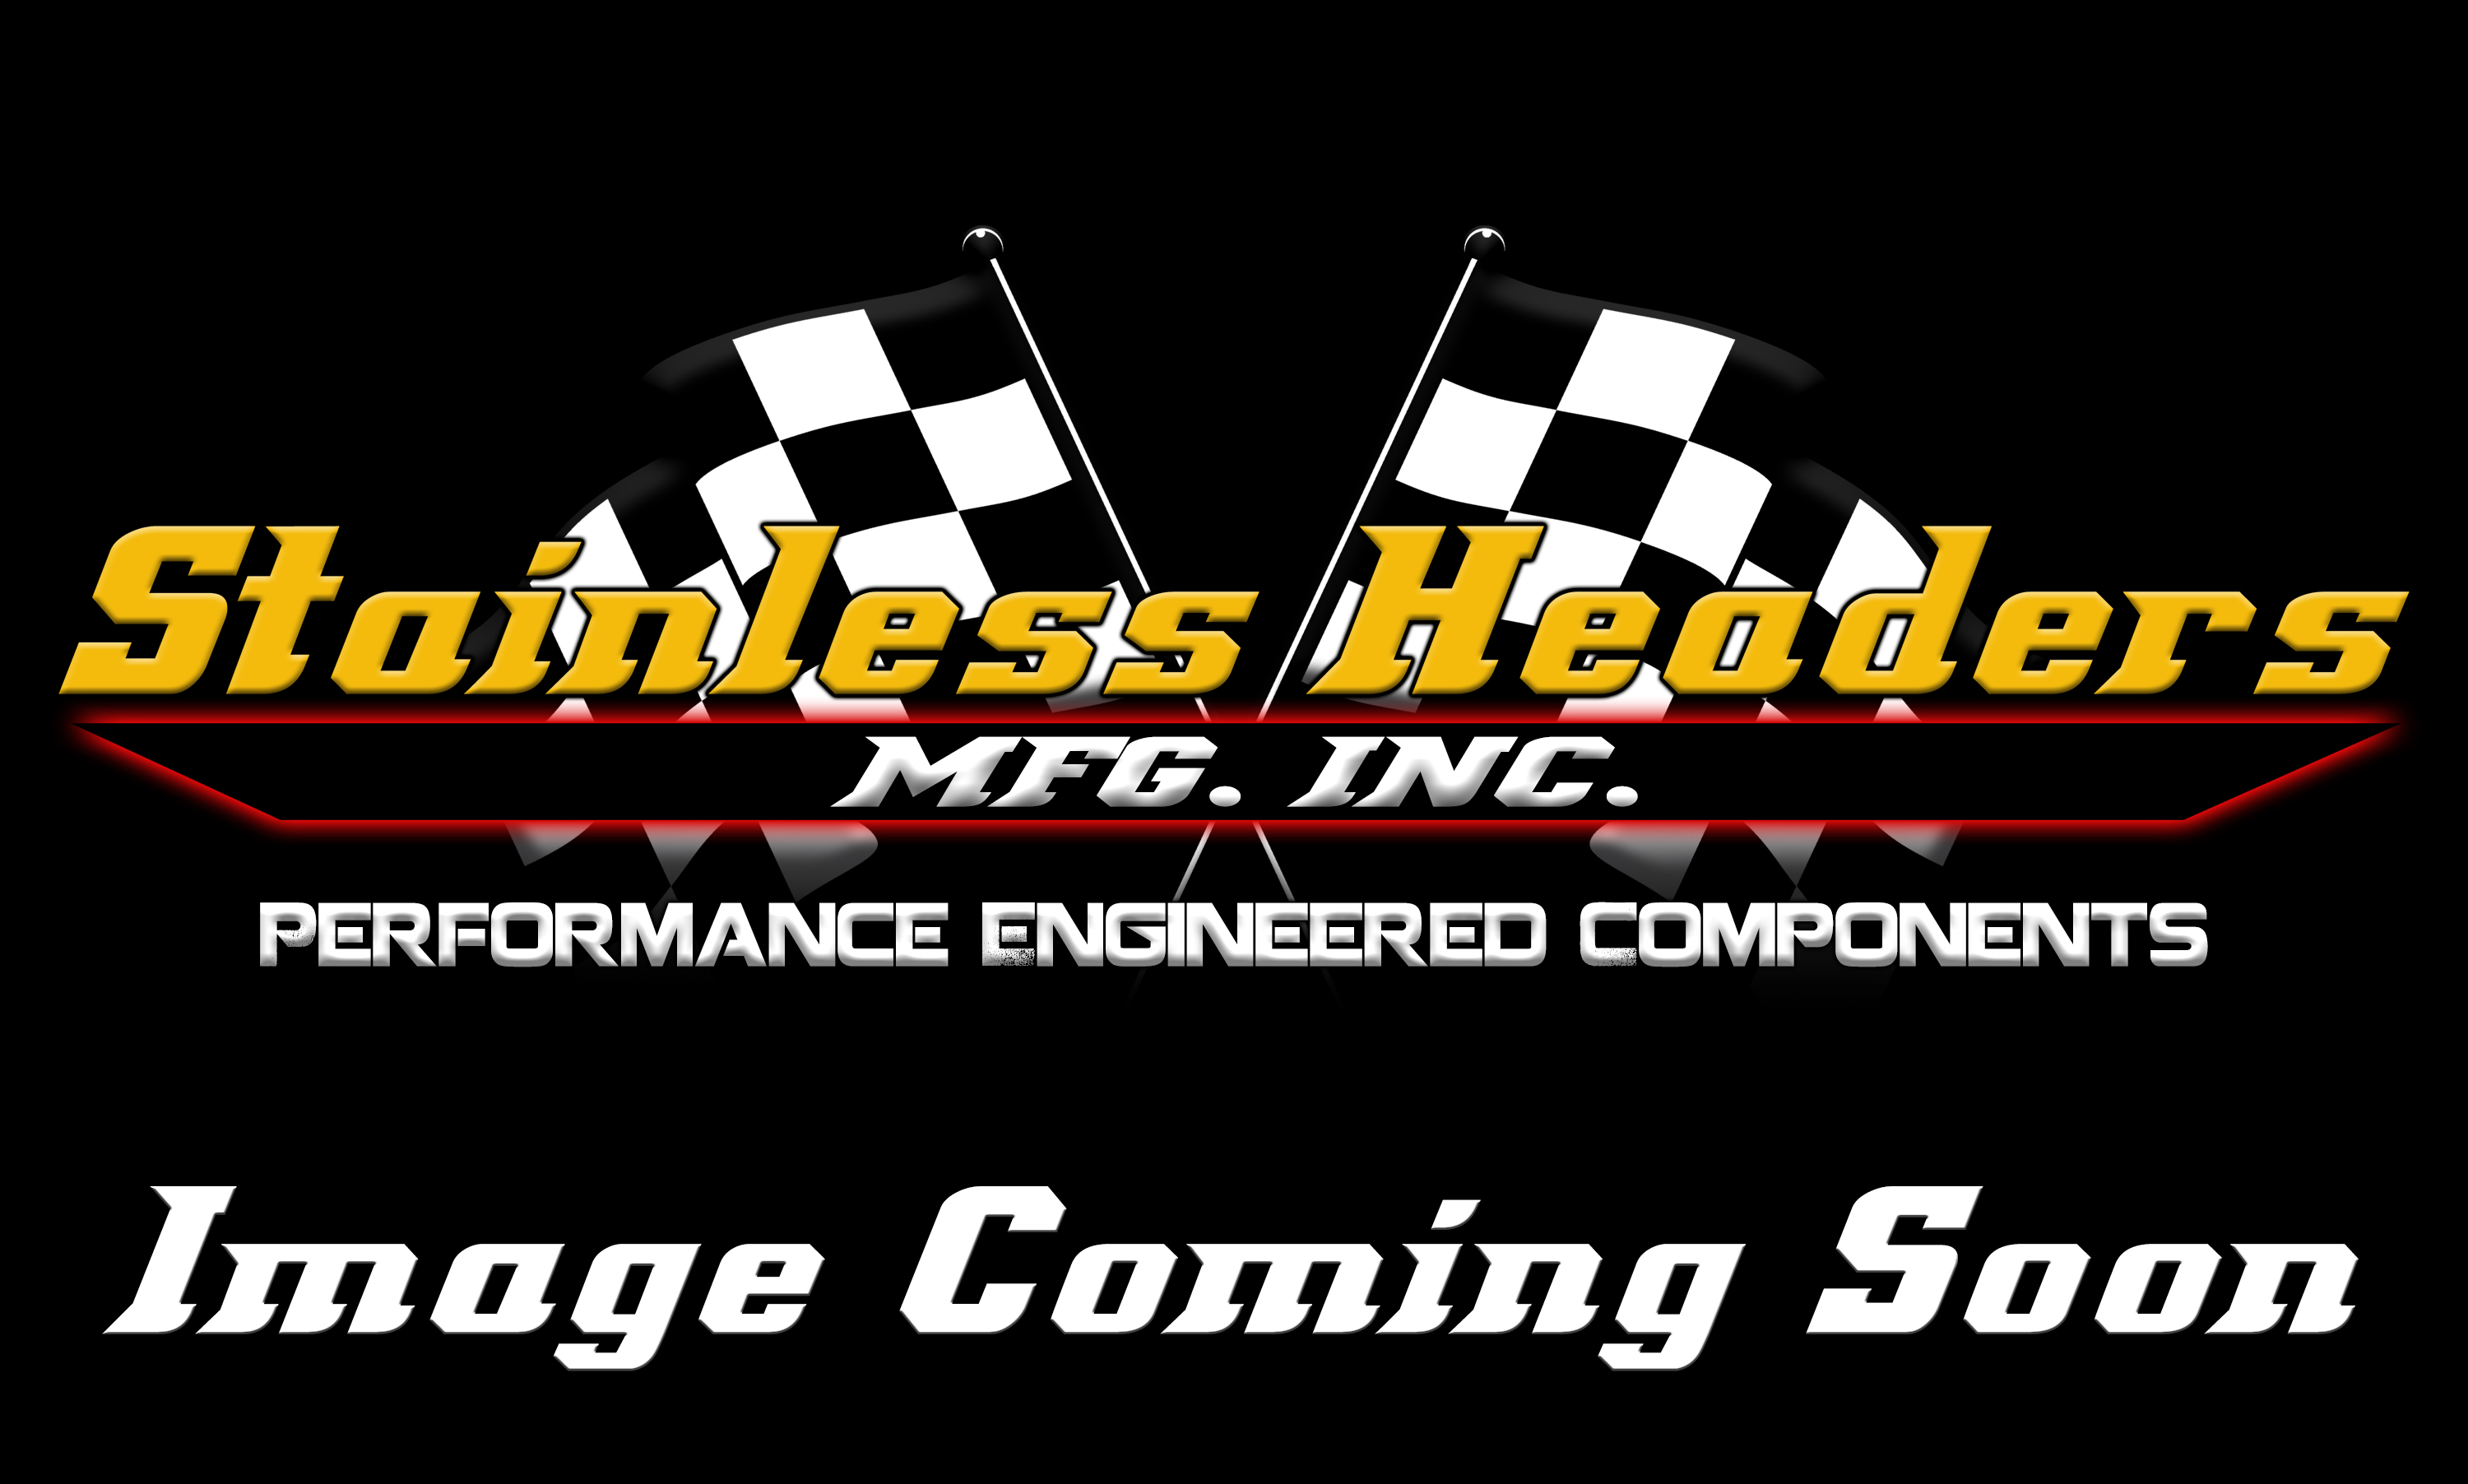 Forced Induction - Performance Turbochargers - CompTurbo Technologies - CTR2971S-5553 Oil Lubricated 2.0 Turbocharger (625 HP)